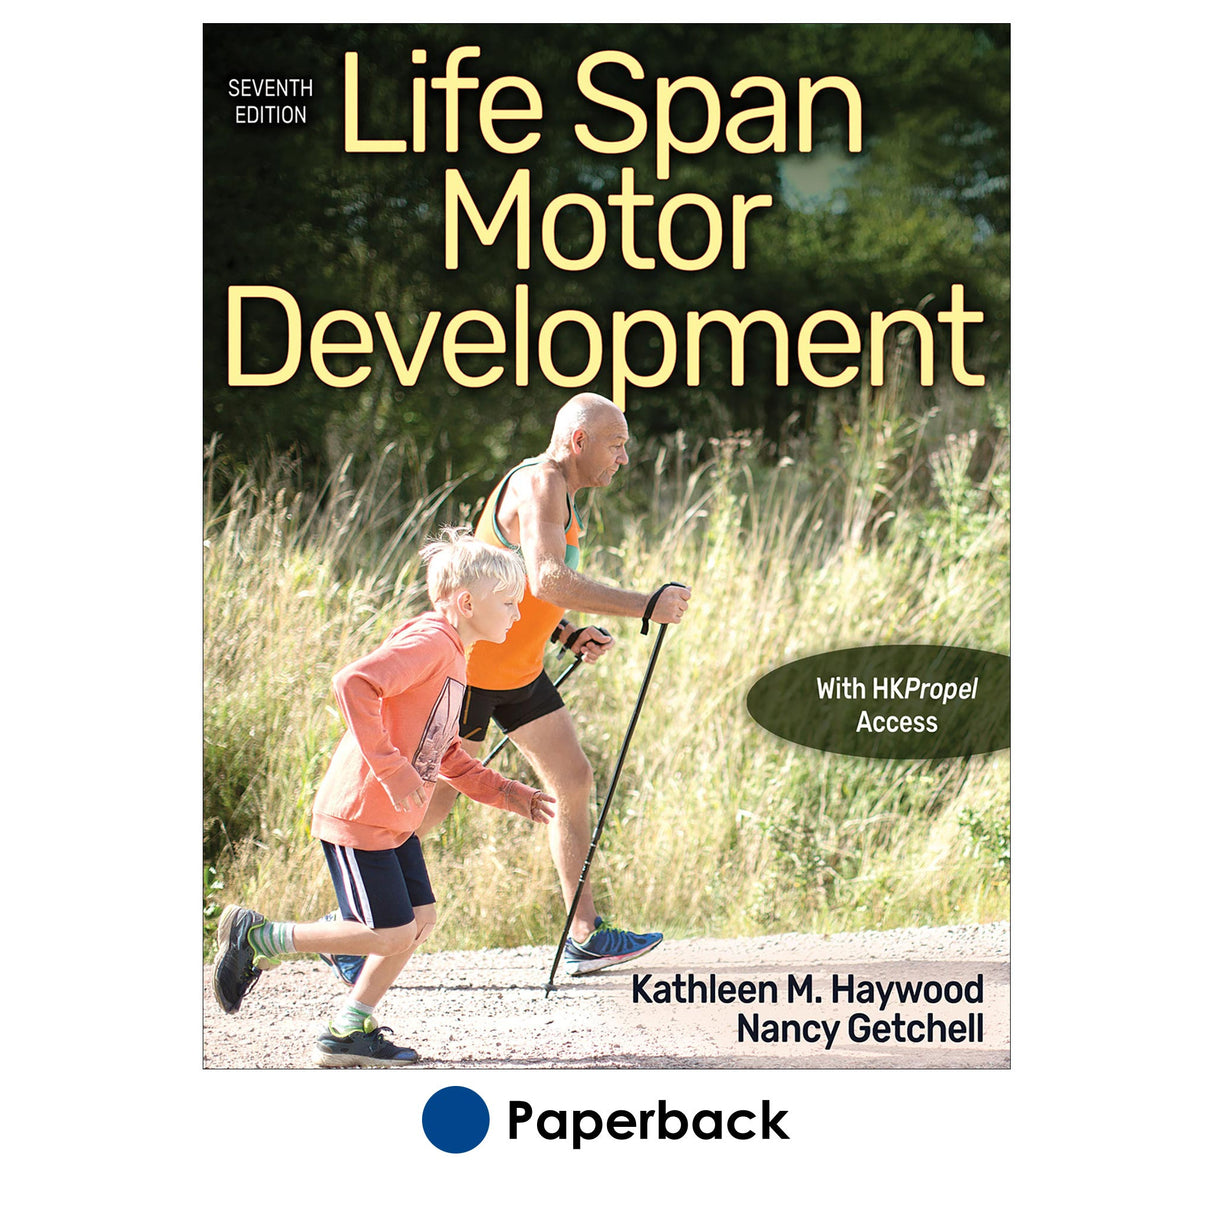 Life Span Motor Development 7th Edition With HKPropel Access